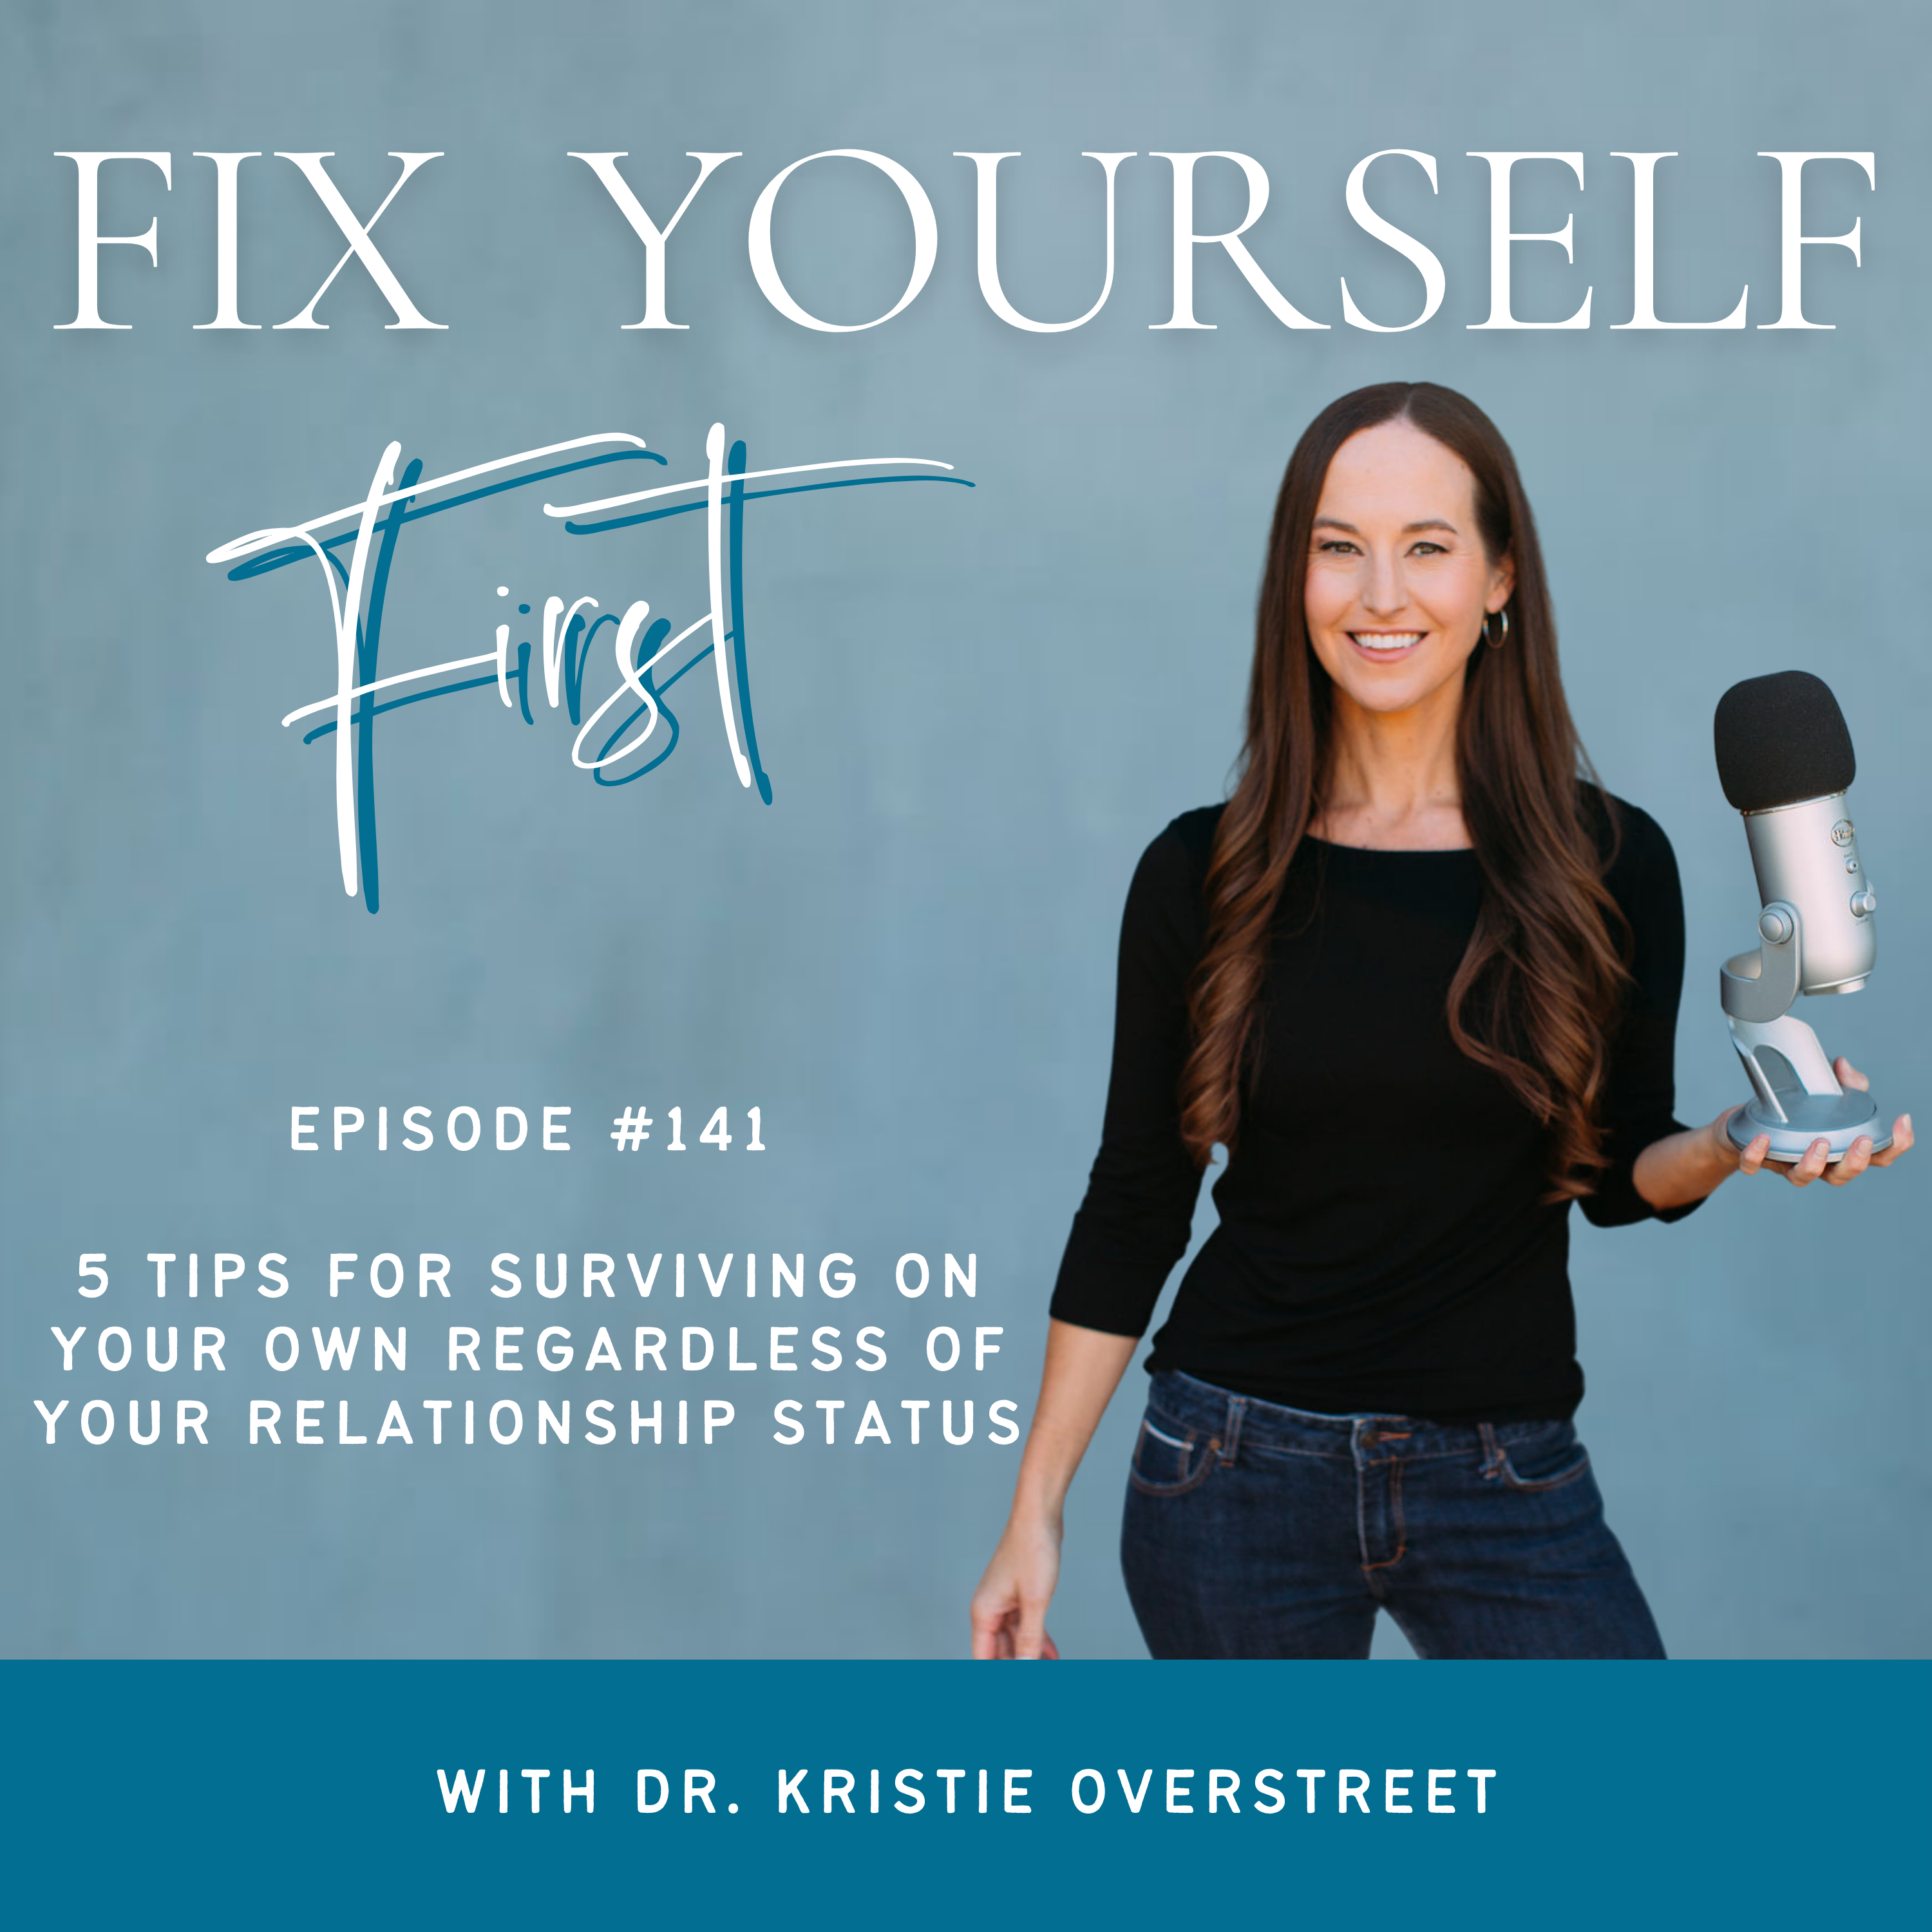 Fix Yourself First Episode 141 5 Tips for Surviving on Your Own Regardless of Your Relationship Status